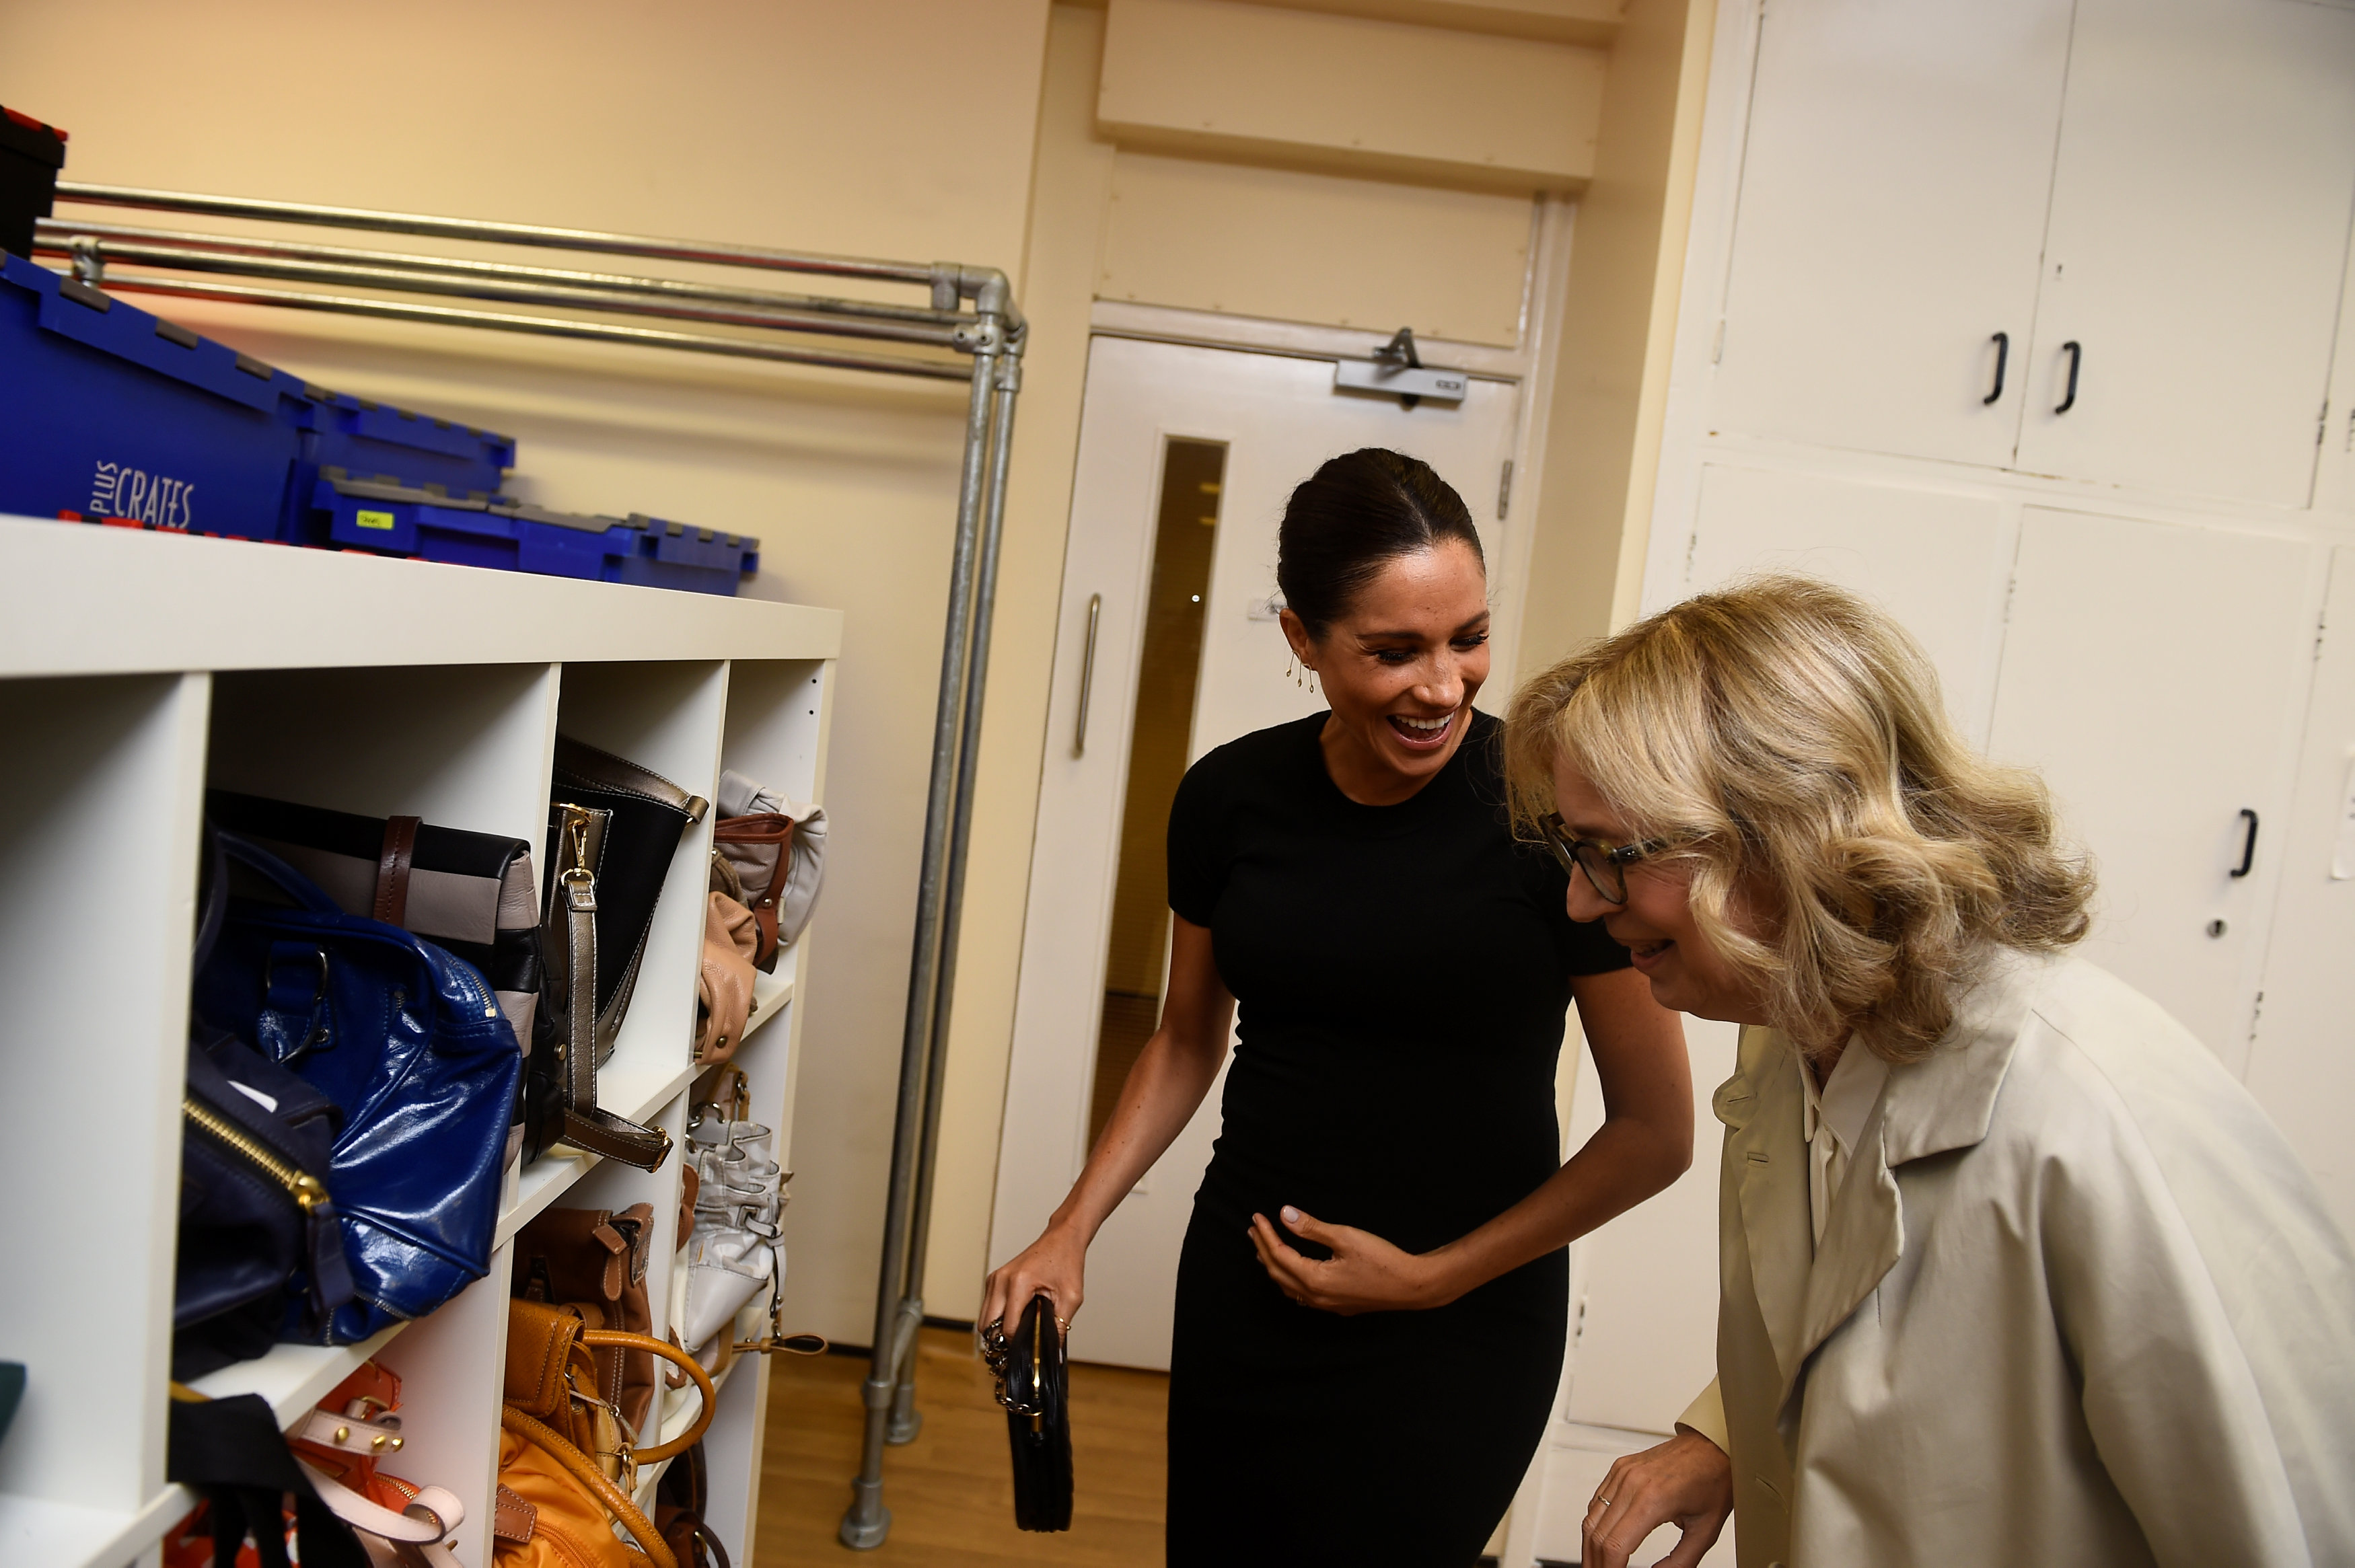 Meghan, Duchess of Sussex reacts as she looks at bags with Lady Juliet Hughes-Hallett during her visit to Smart Works on January 10, 2019 in London, United Kingdom. Smart Works is one of the four organizations which she has become Royal Patron of it was announced today by Kensington Palace. The three other organisations are The National Theatre, The Association of Commonwealth Universities (ACU) and Mayhew. (Photo by Clodagh Kilcoyne - WPA Pool/Getty Images) (WPA Pool—Getty Images)